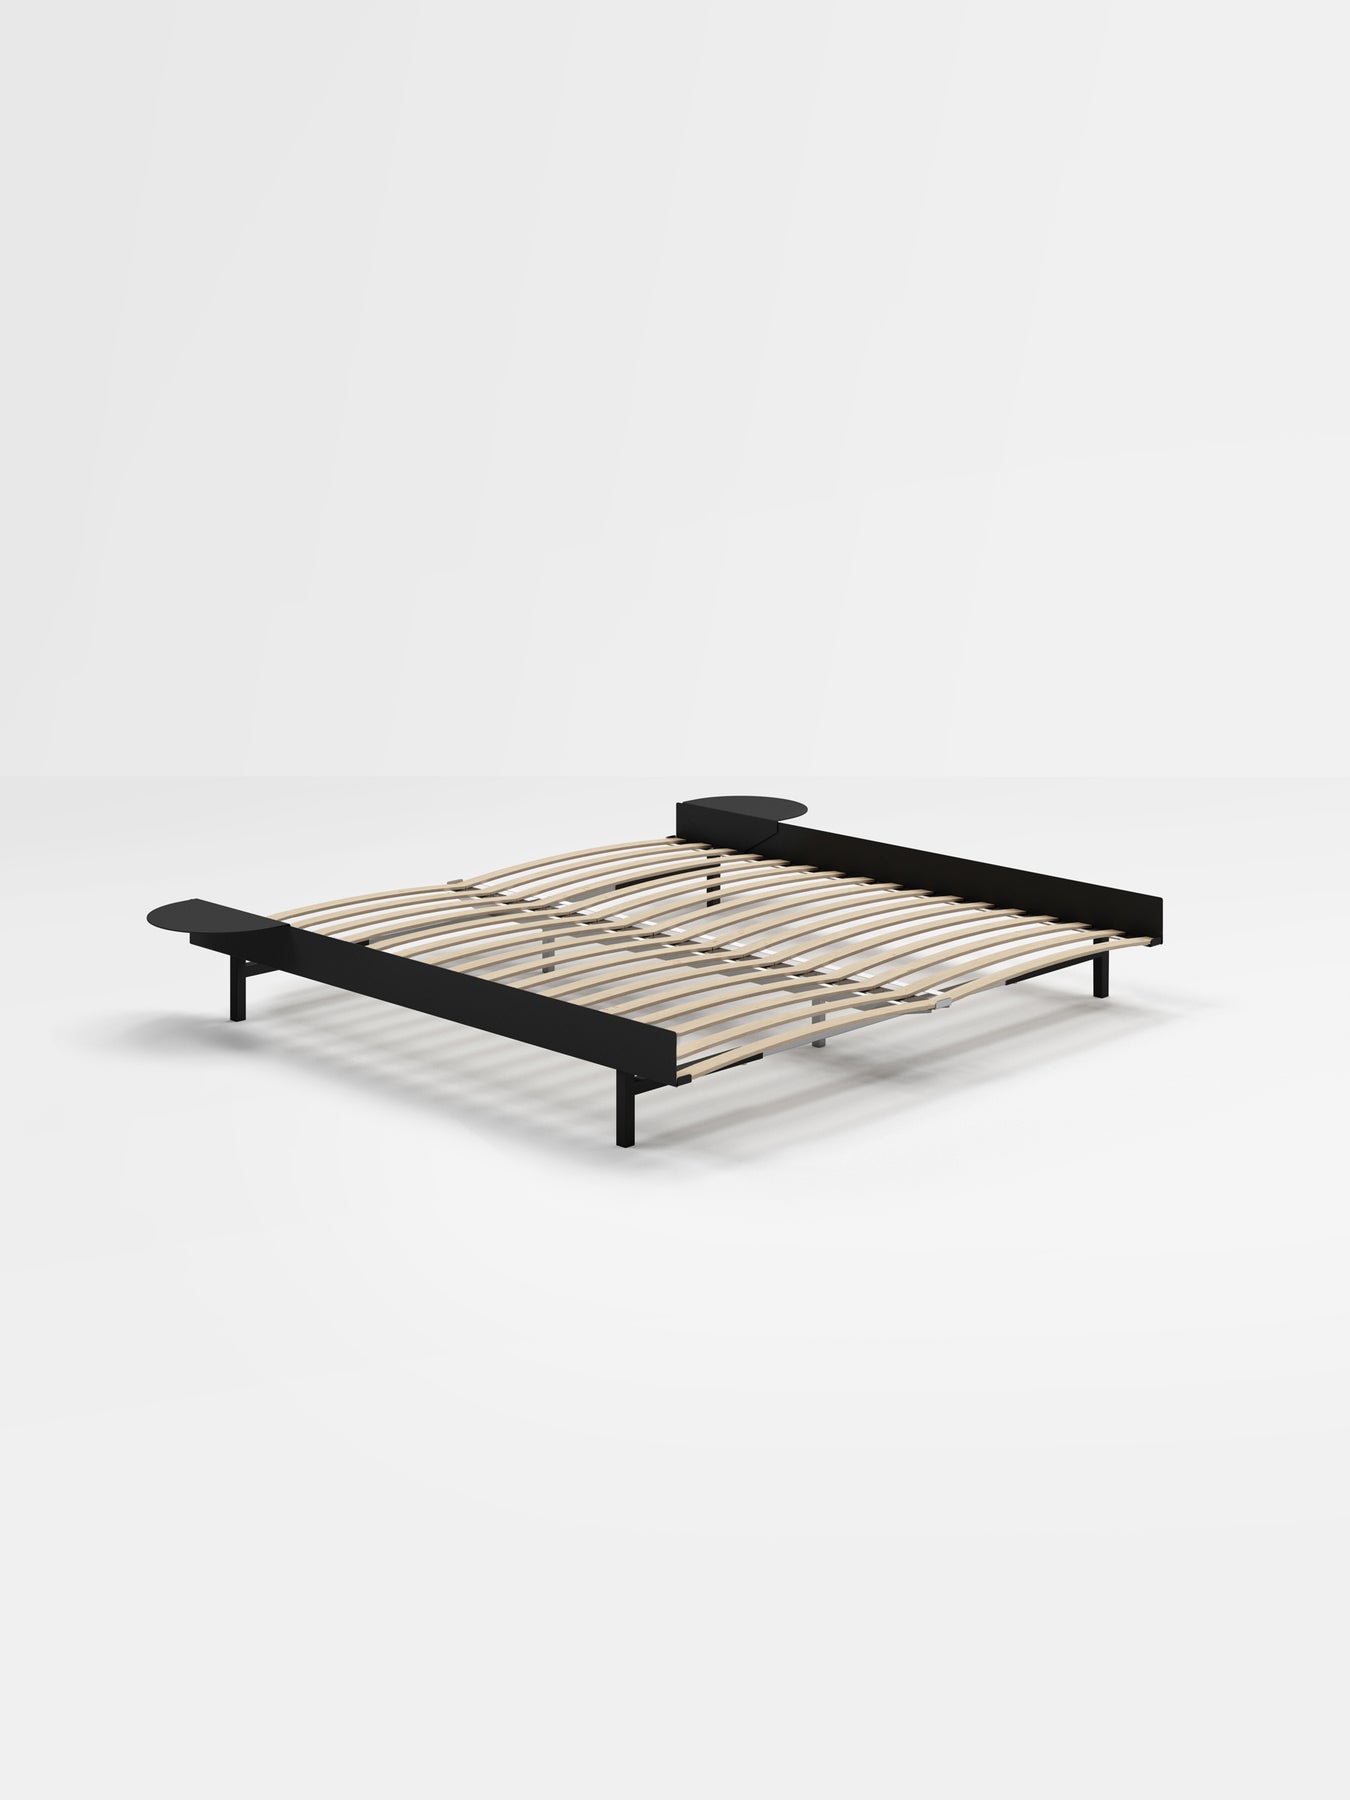 streep concert veiling Bed 90 – 180cm by MOEBE | Fully expandable for any mattress size. – moebe.dk